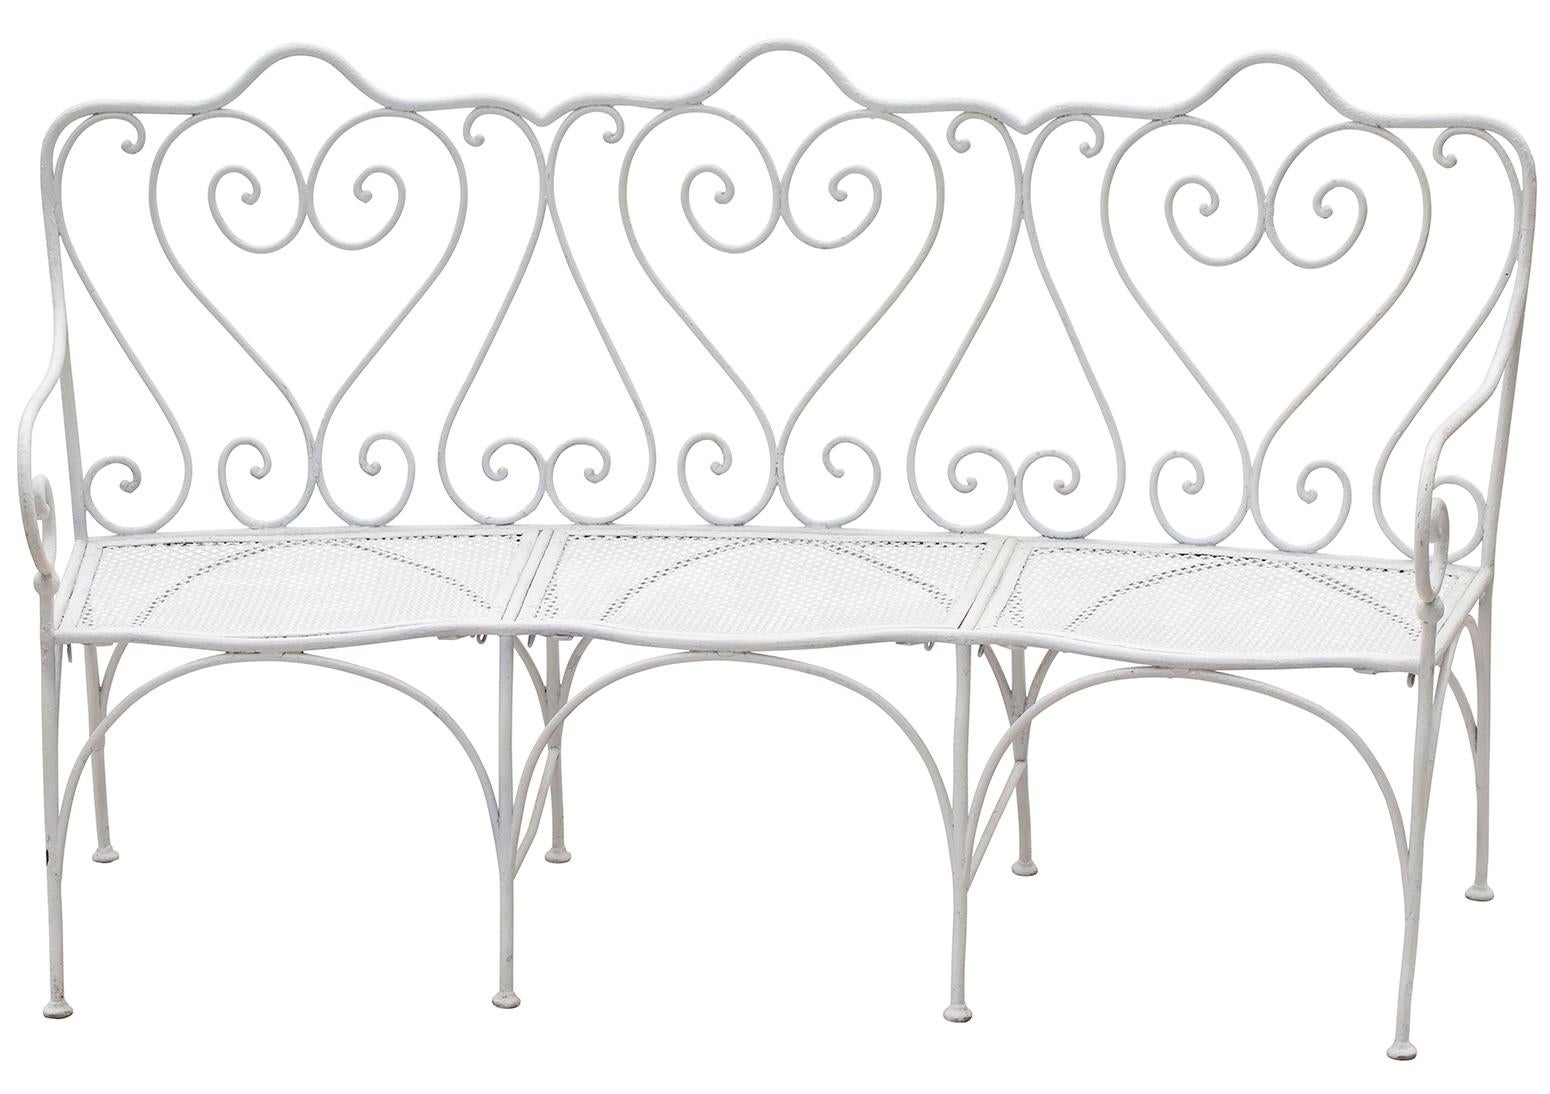 A good quality pair of French wrought iron garden benches circa 1890, with great details typical of the period. The back is divided into three parts with a scrolled motif designating each. The pierced metal seat has a curved front and is divided